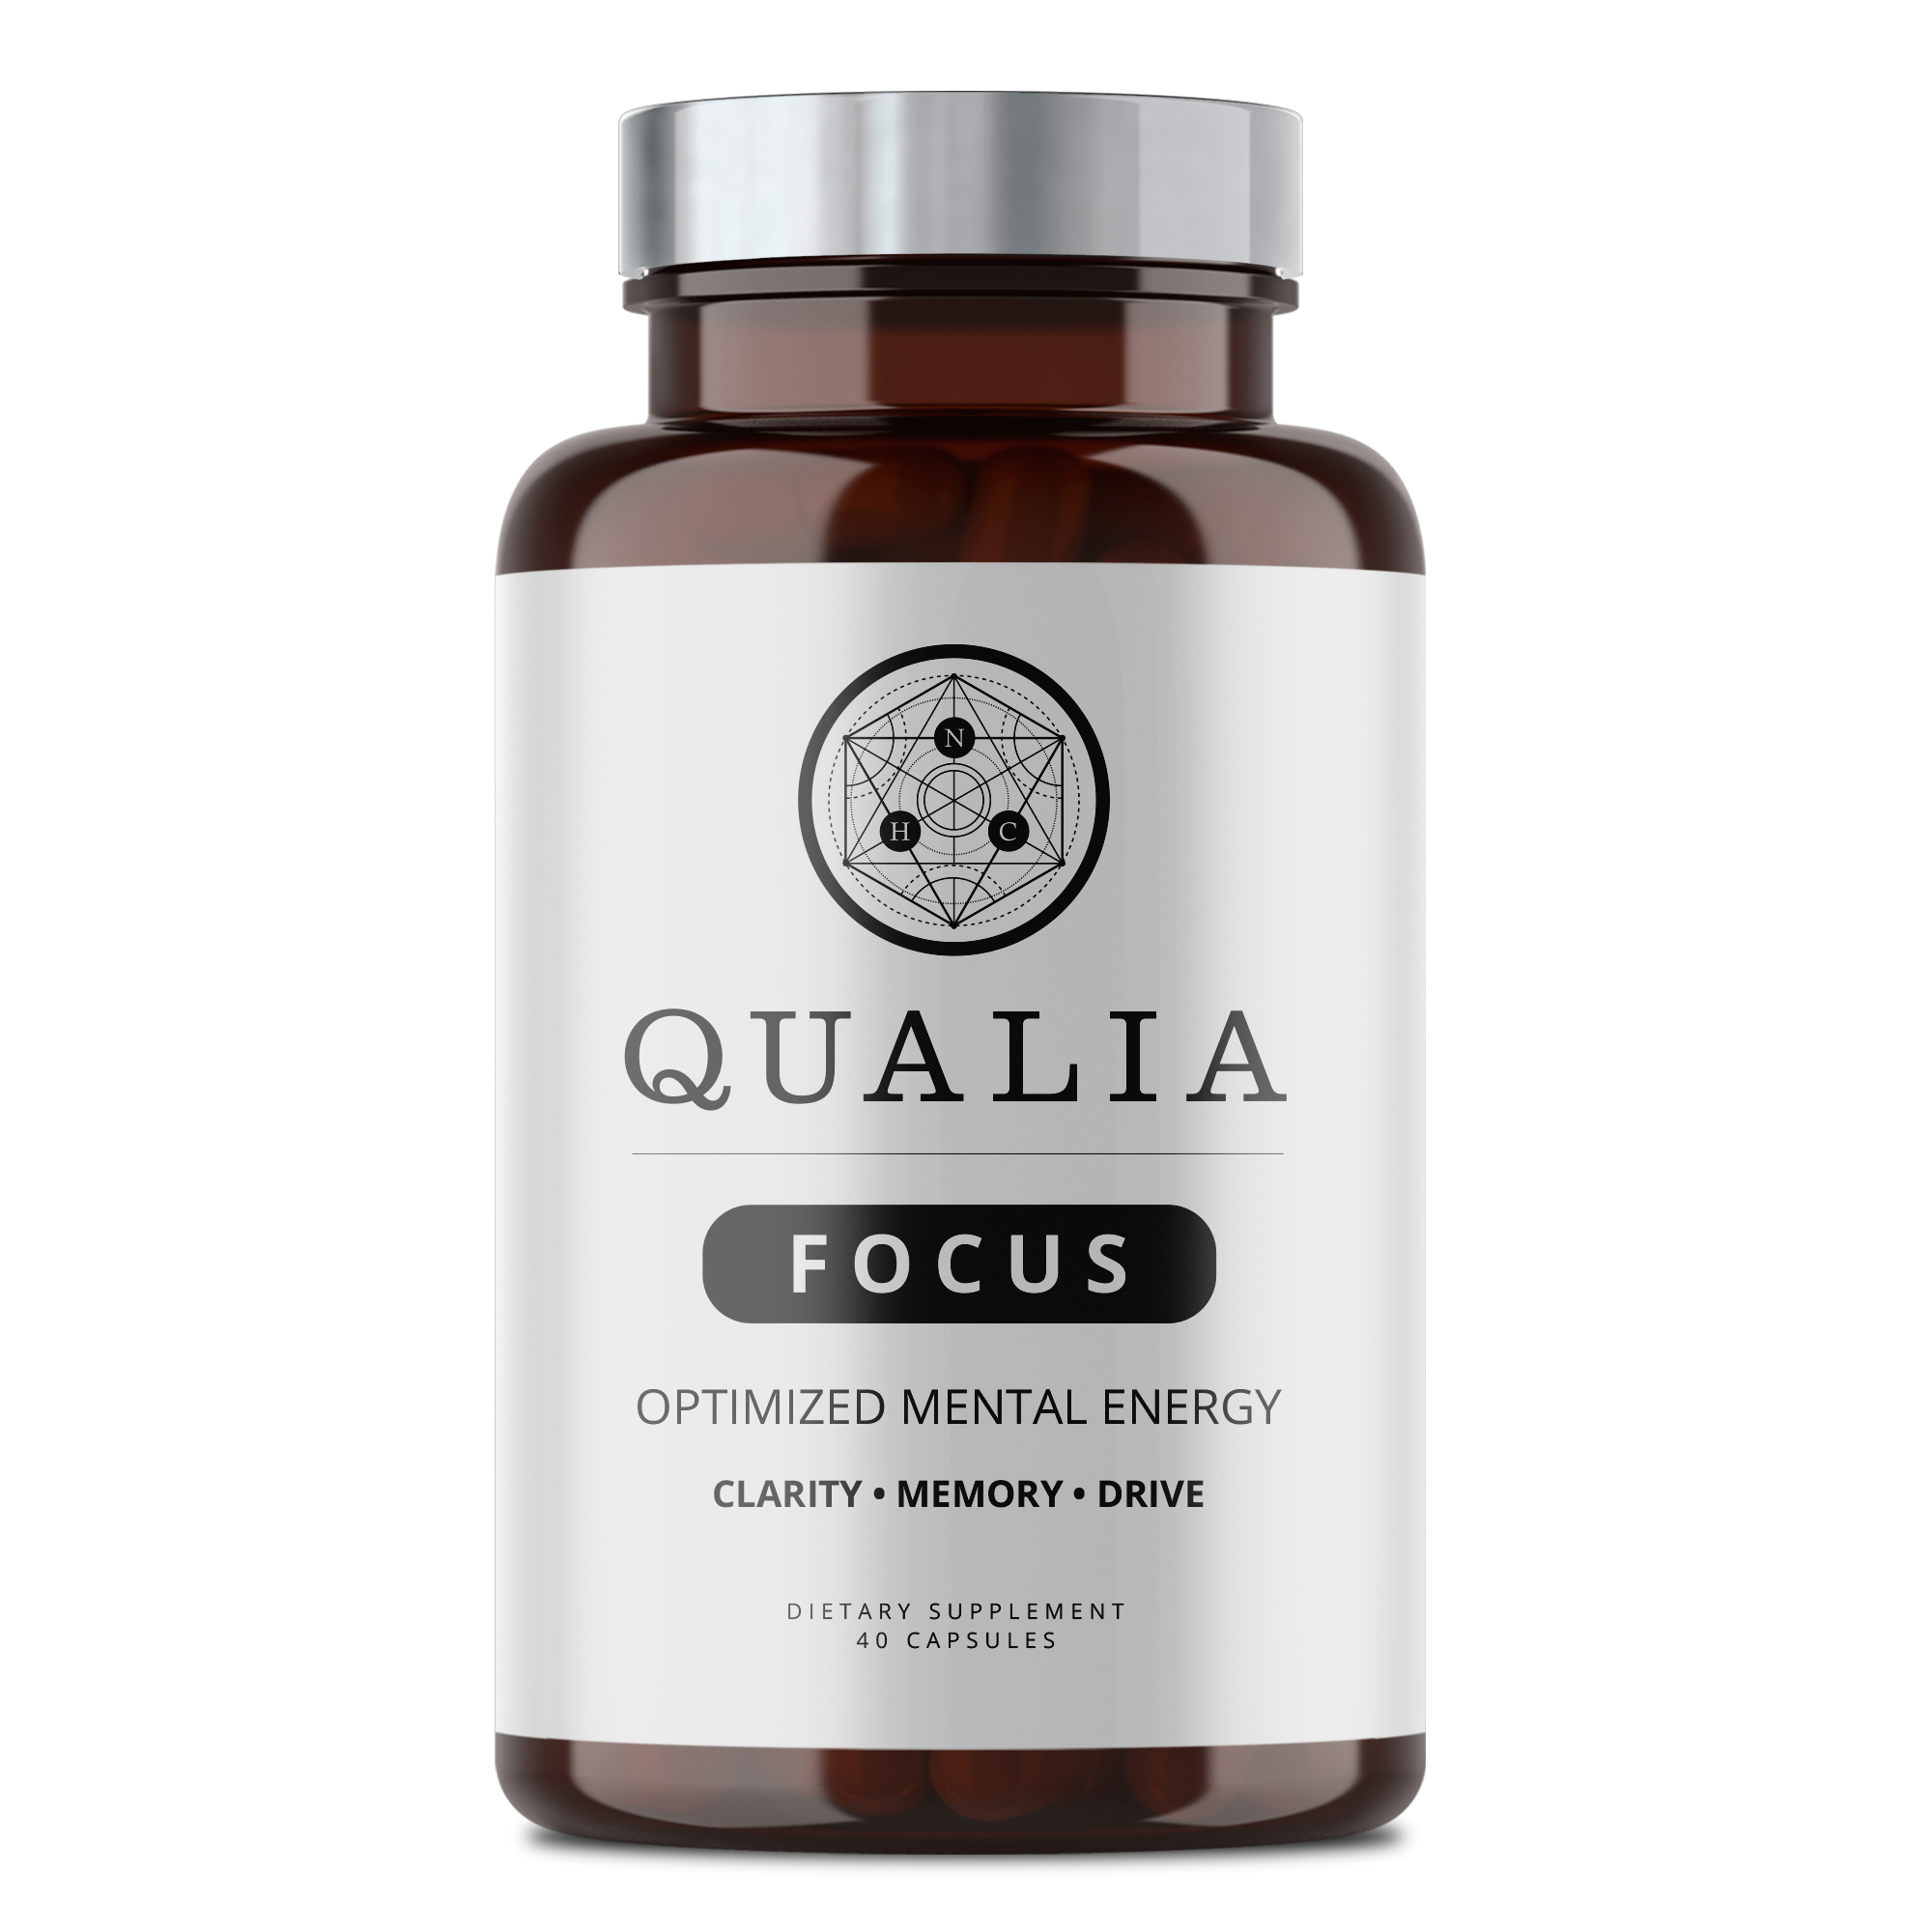 Qualia Focus Review and Buyer's Guide